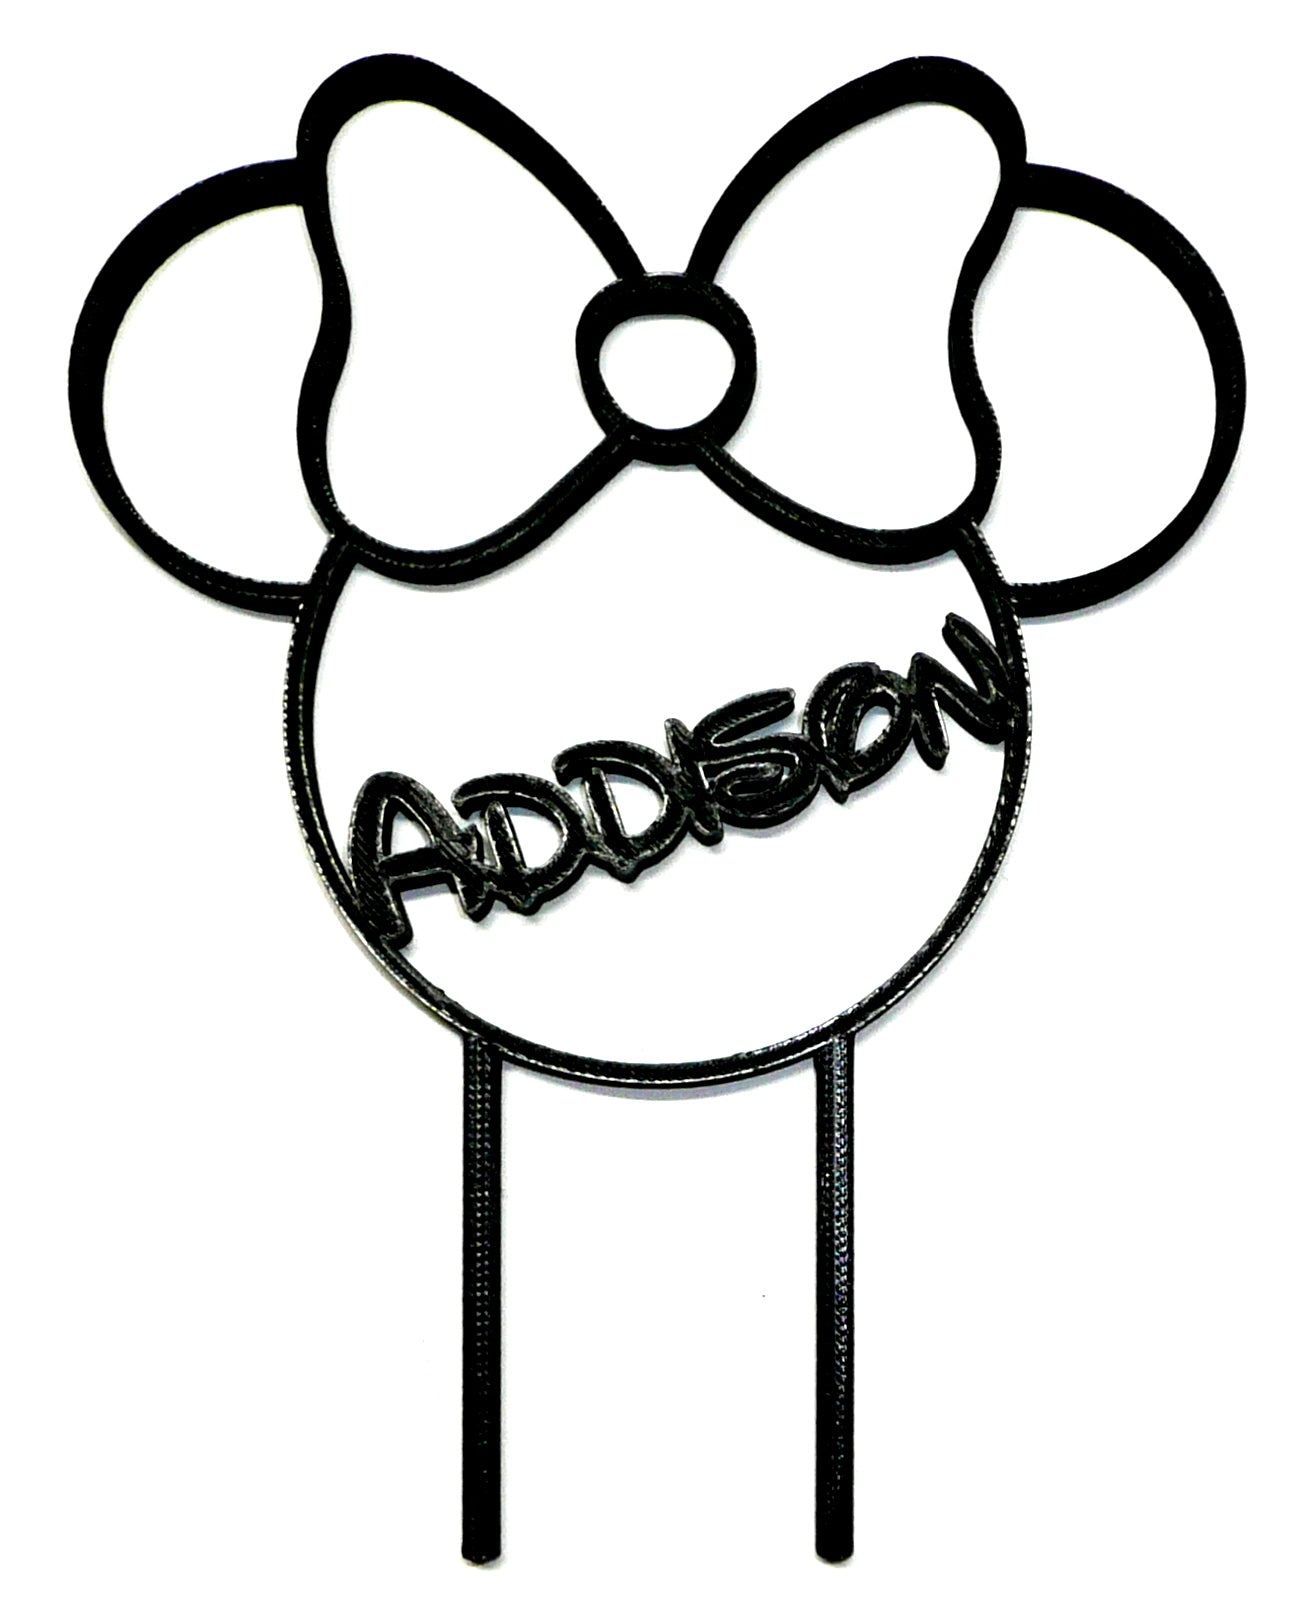 Personalized Minnie Mouse Cake Topper Smash Cake Made in USA PR2549